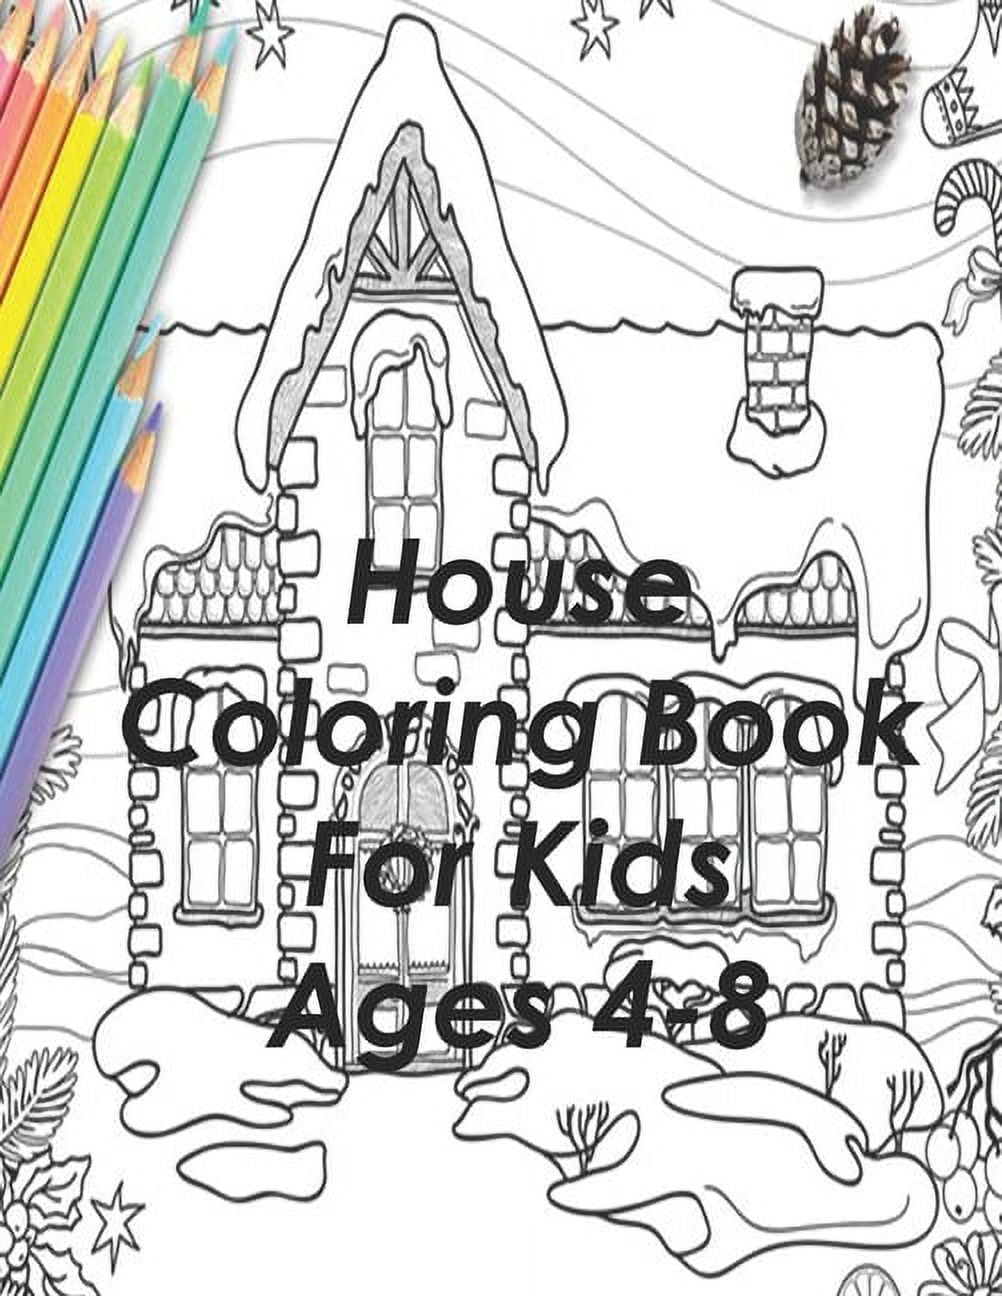 How to draw a house,draw a house easy,draw house for kids - video  Dailymotion